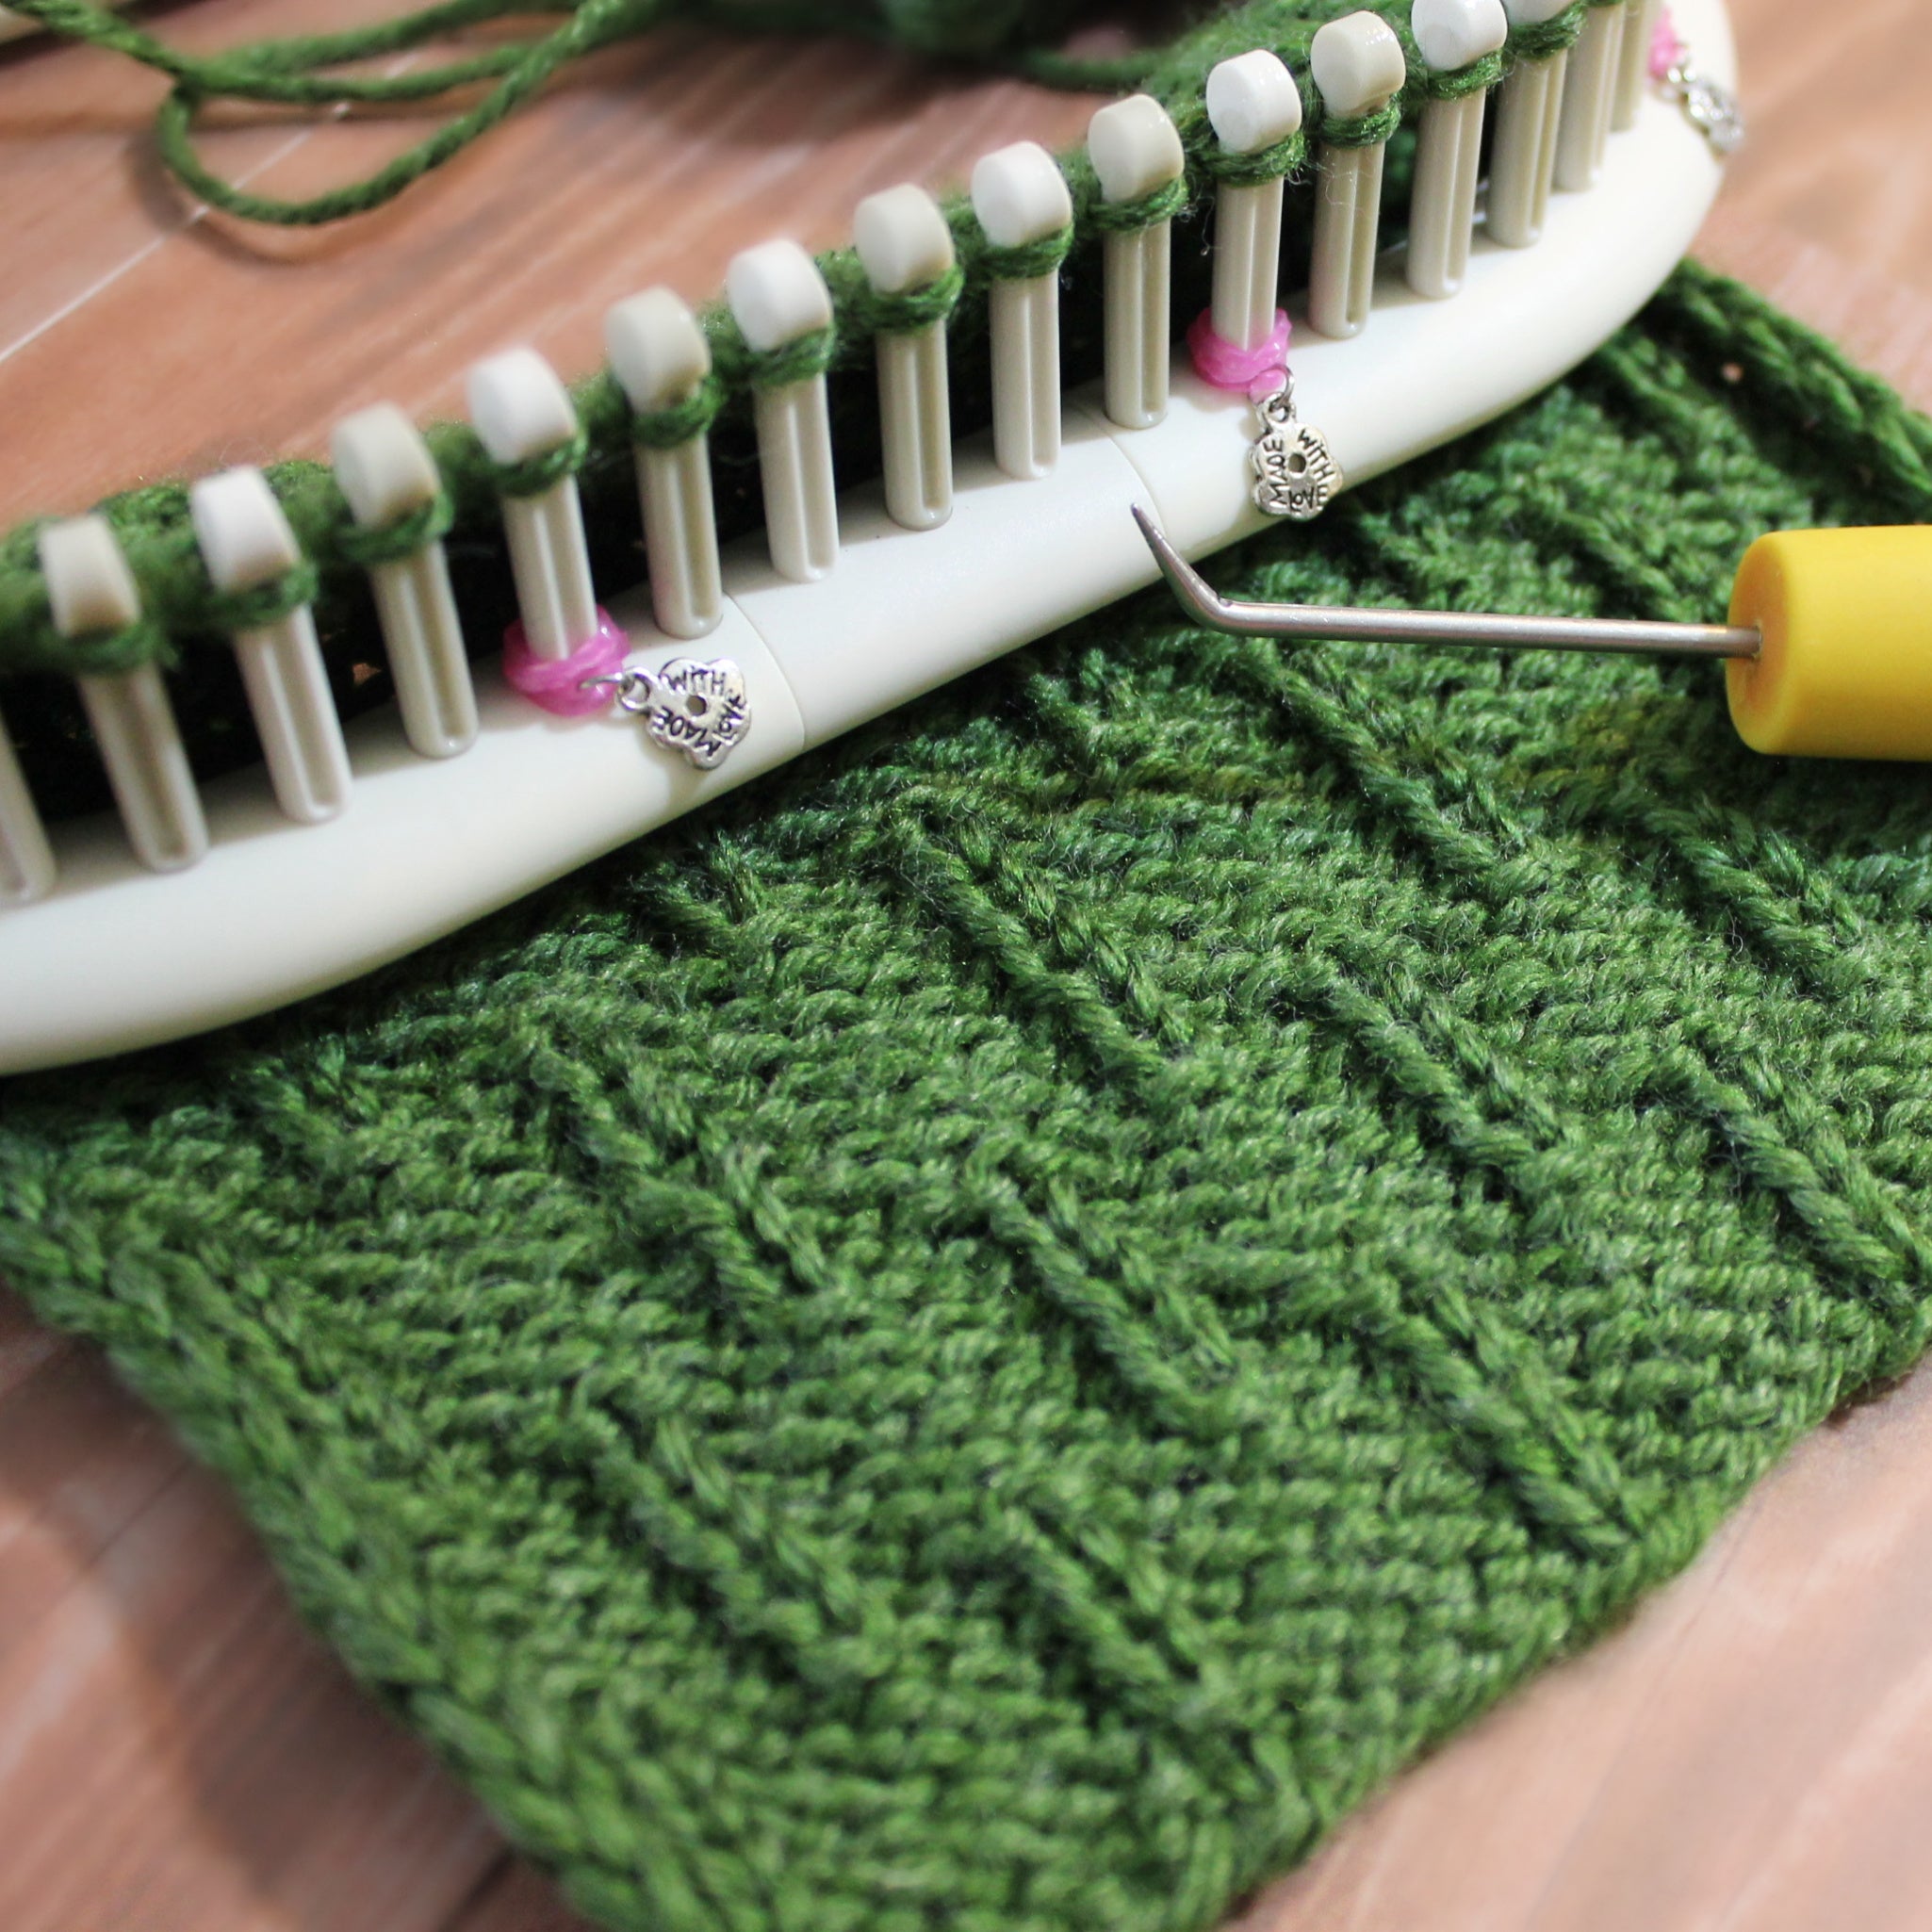 LOOM KNITTING Stitch Patterns - The Caterpillar on Any Loom Round